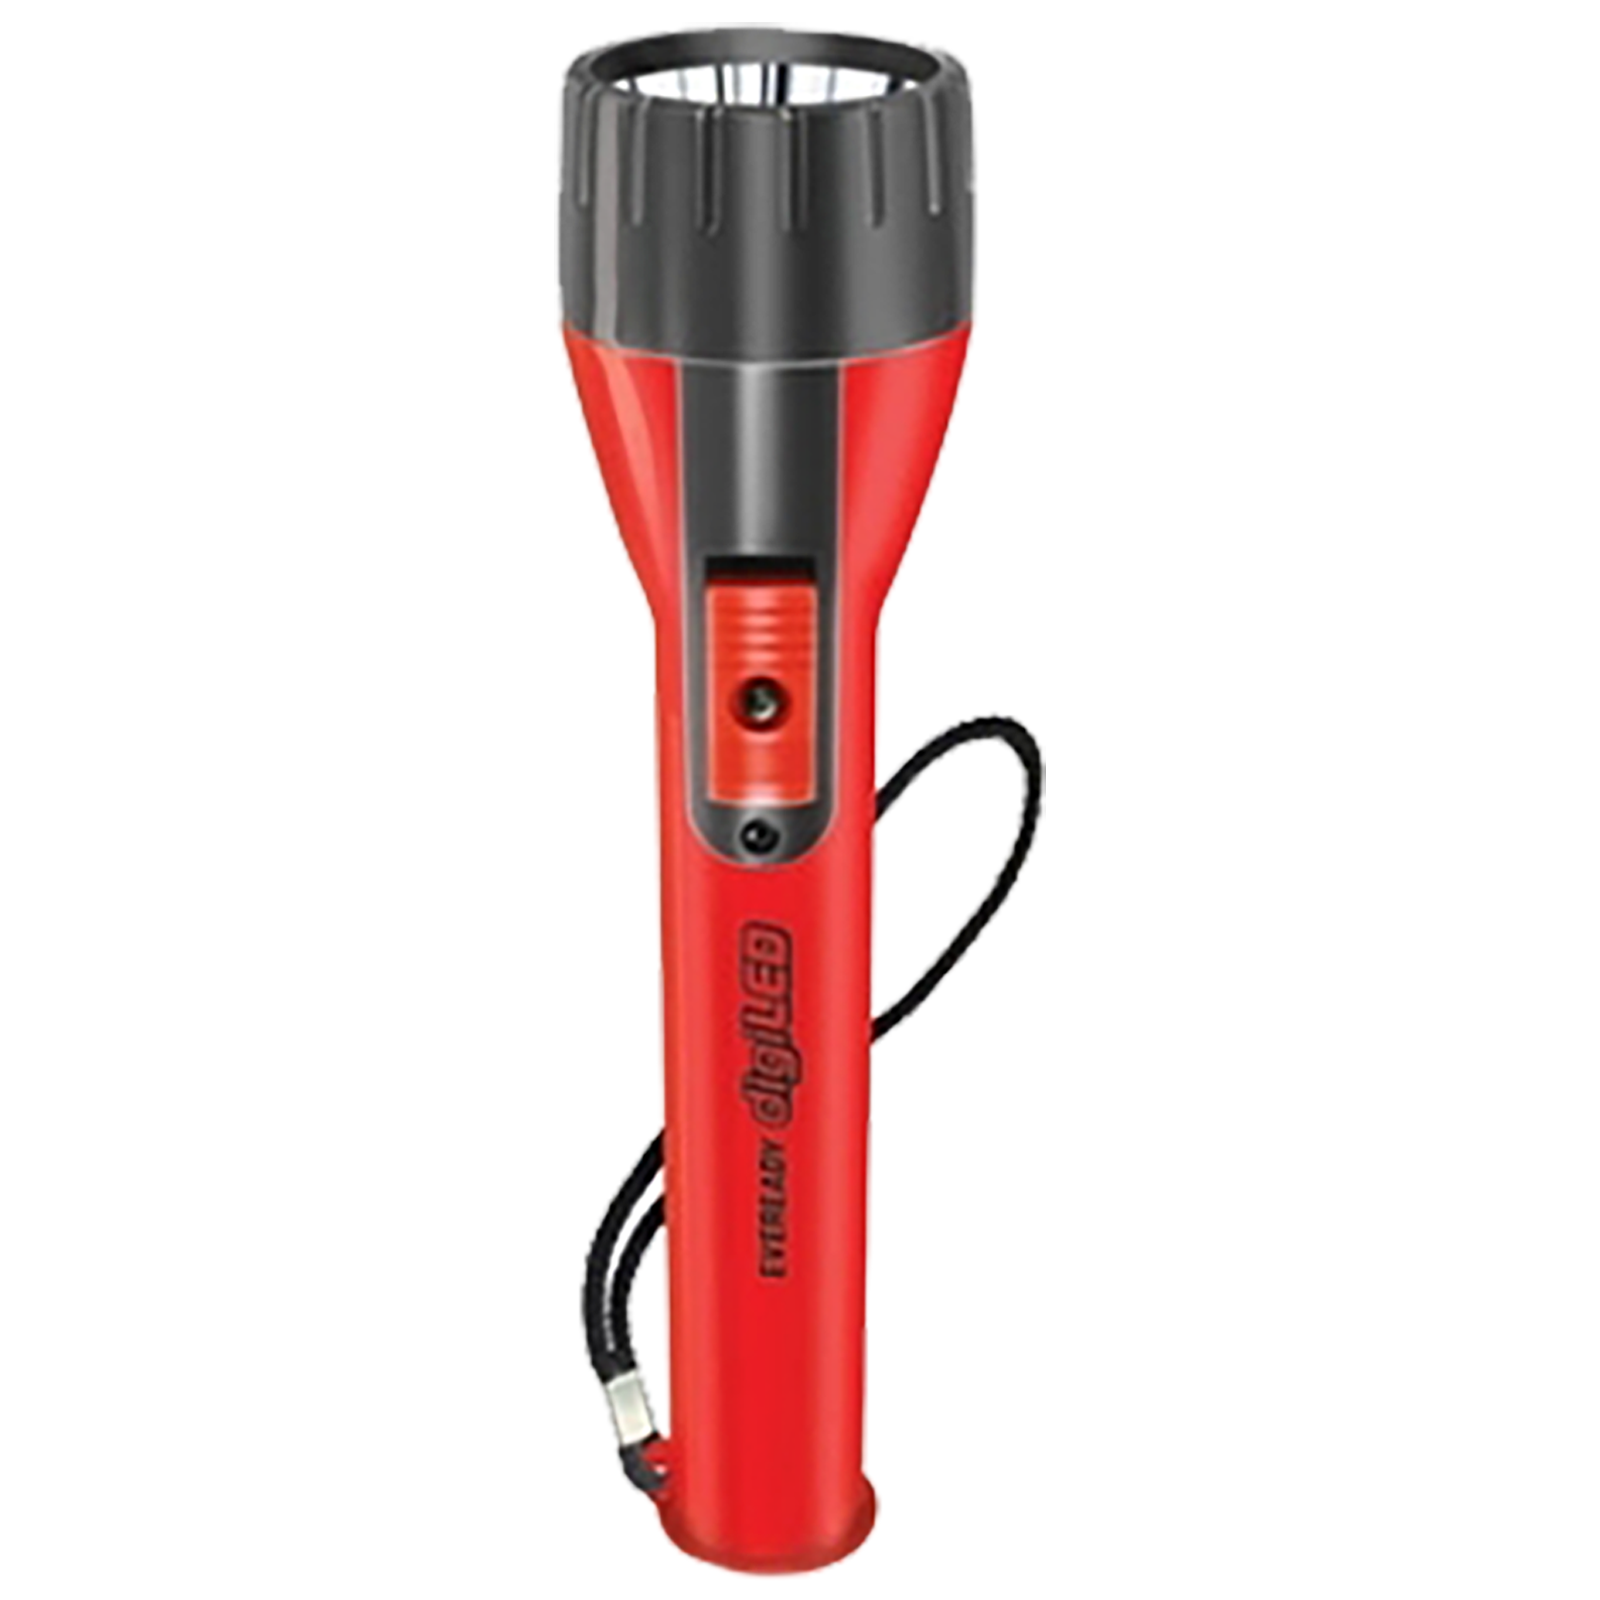 Eveready Conica 0.75 Watts LED Torch (120 Lumens, Intense White Light, EVE DL07, Red/Black)_1